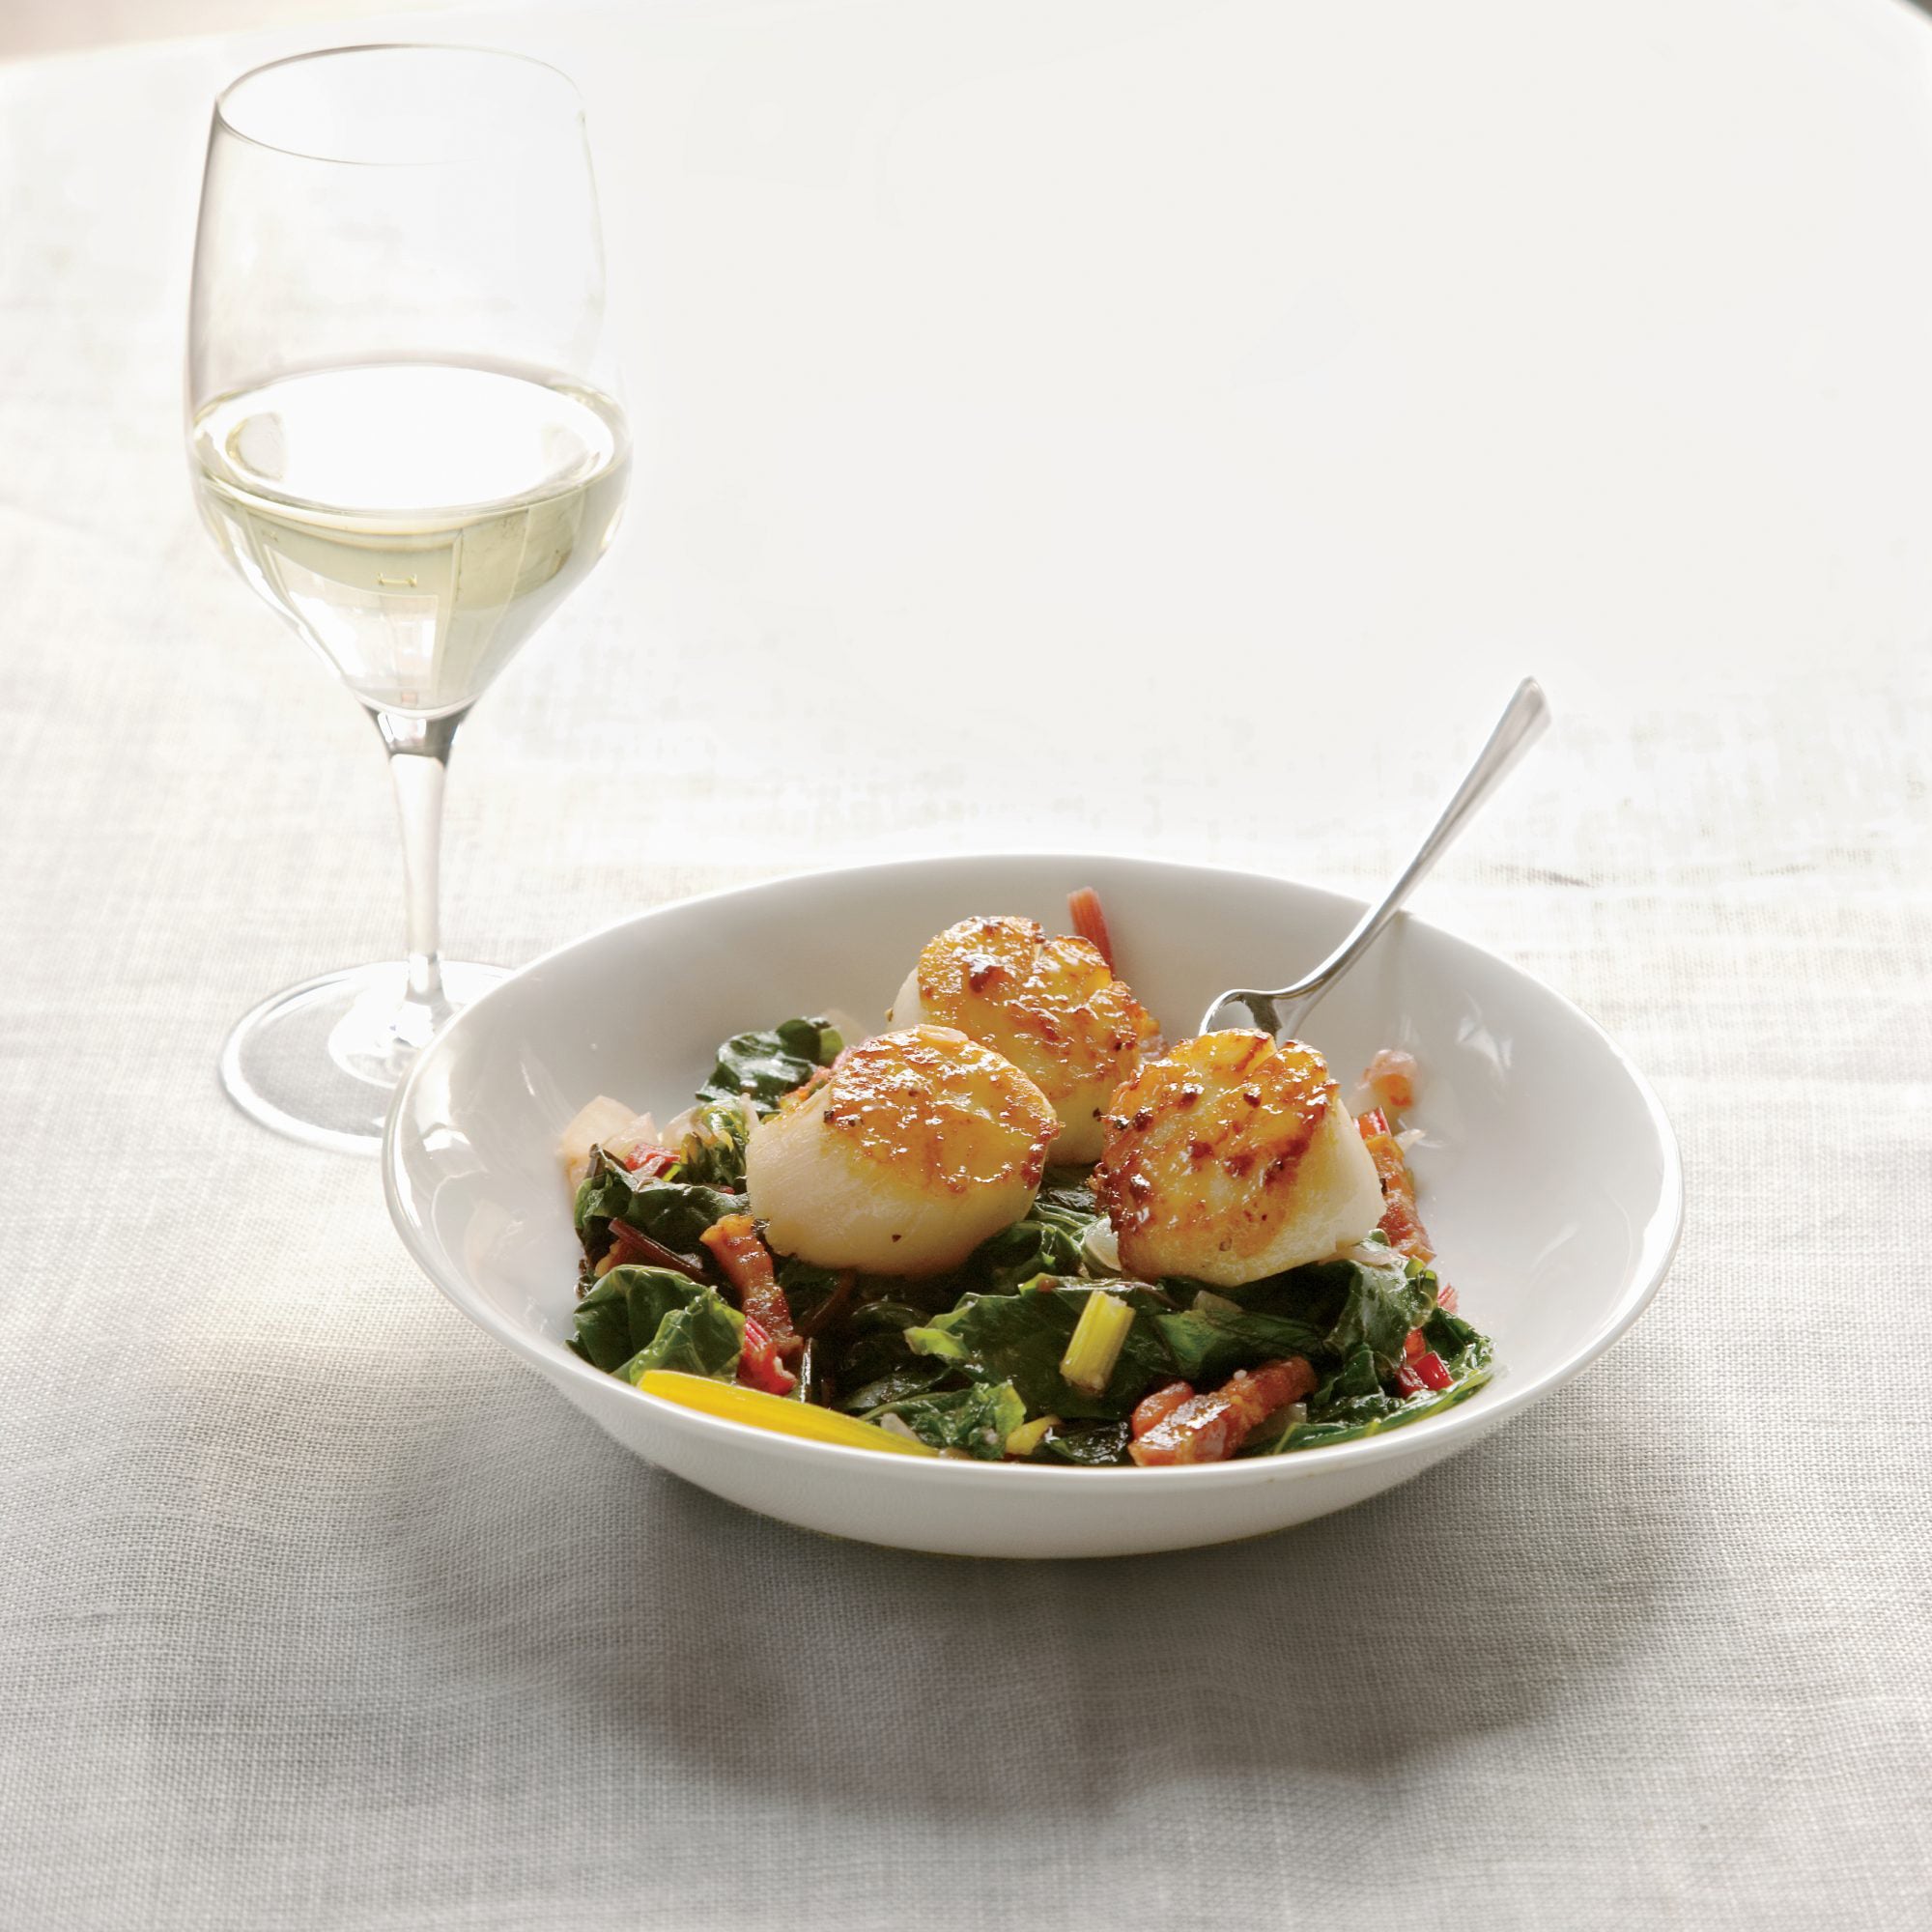 Seared Scallops with Bacon-Braised Chard